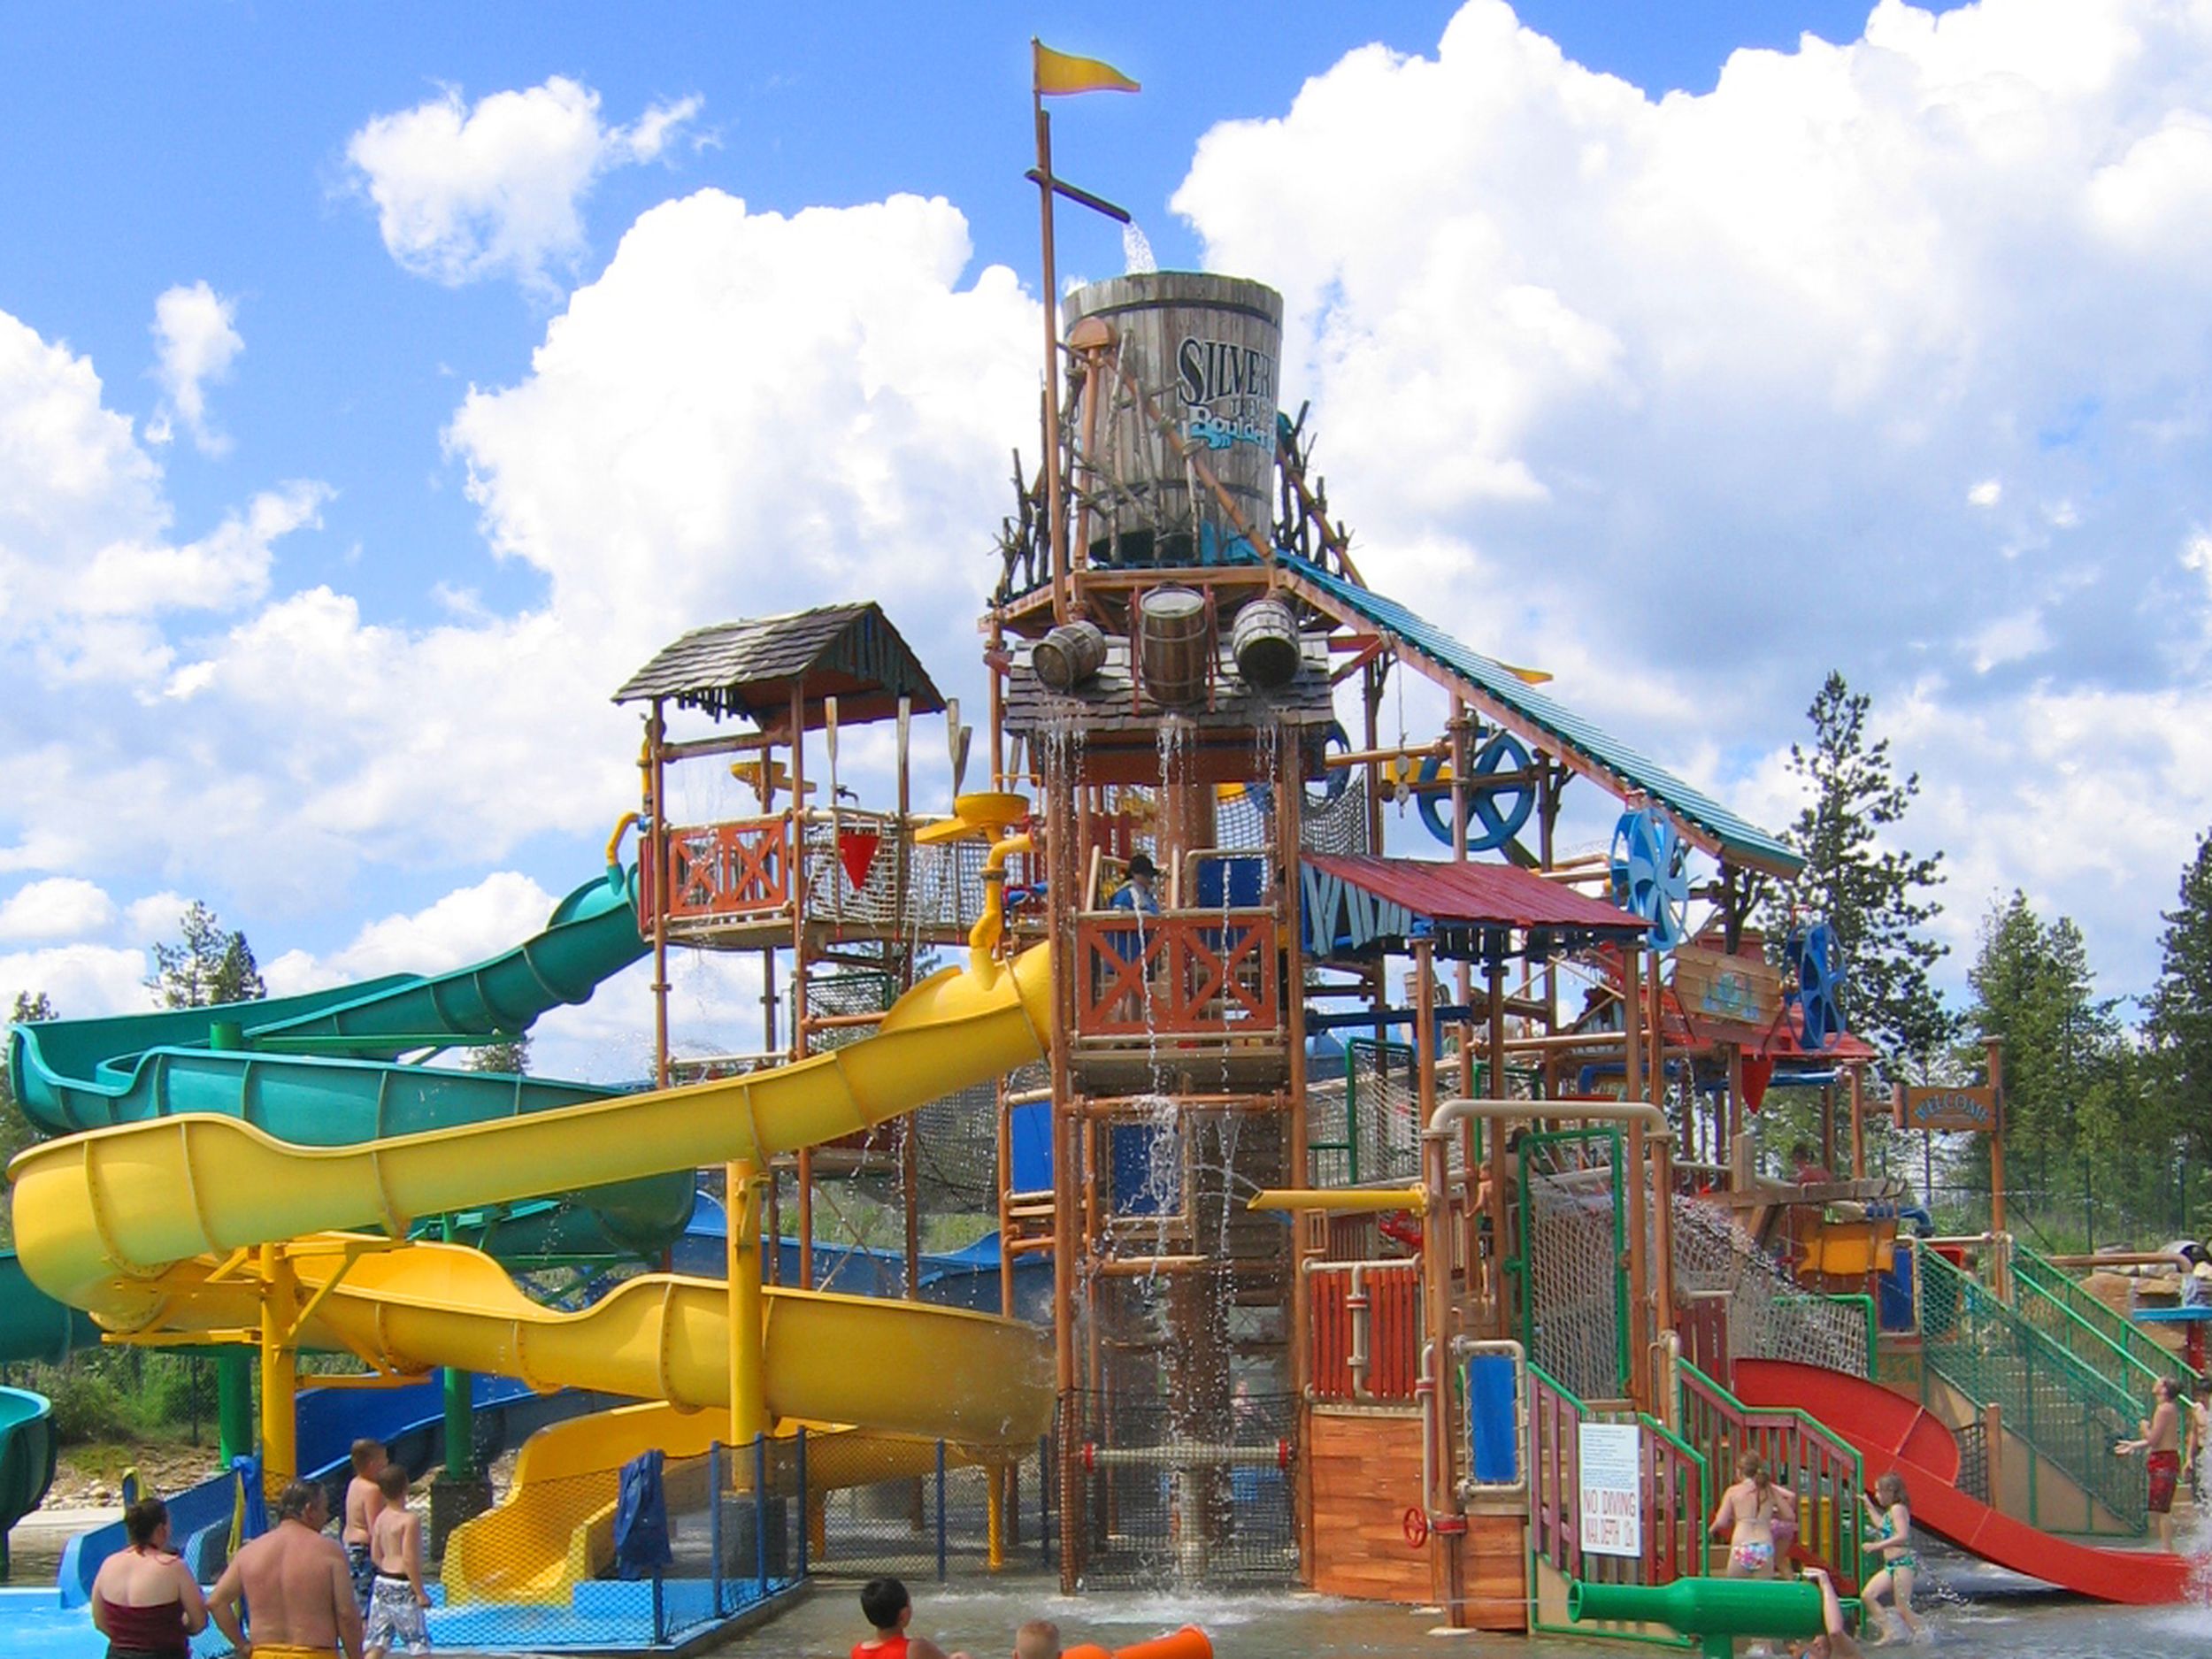 Tallest slide in Idaho now at local playground